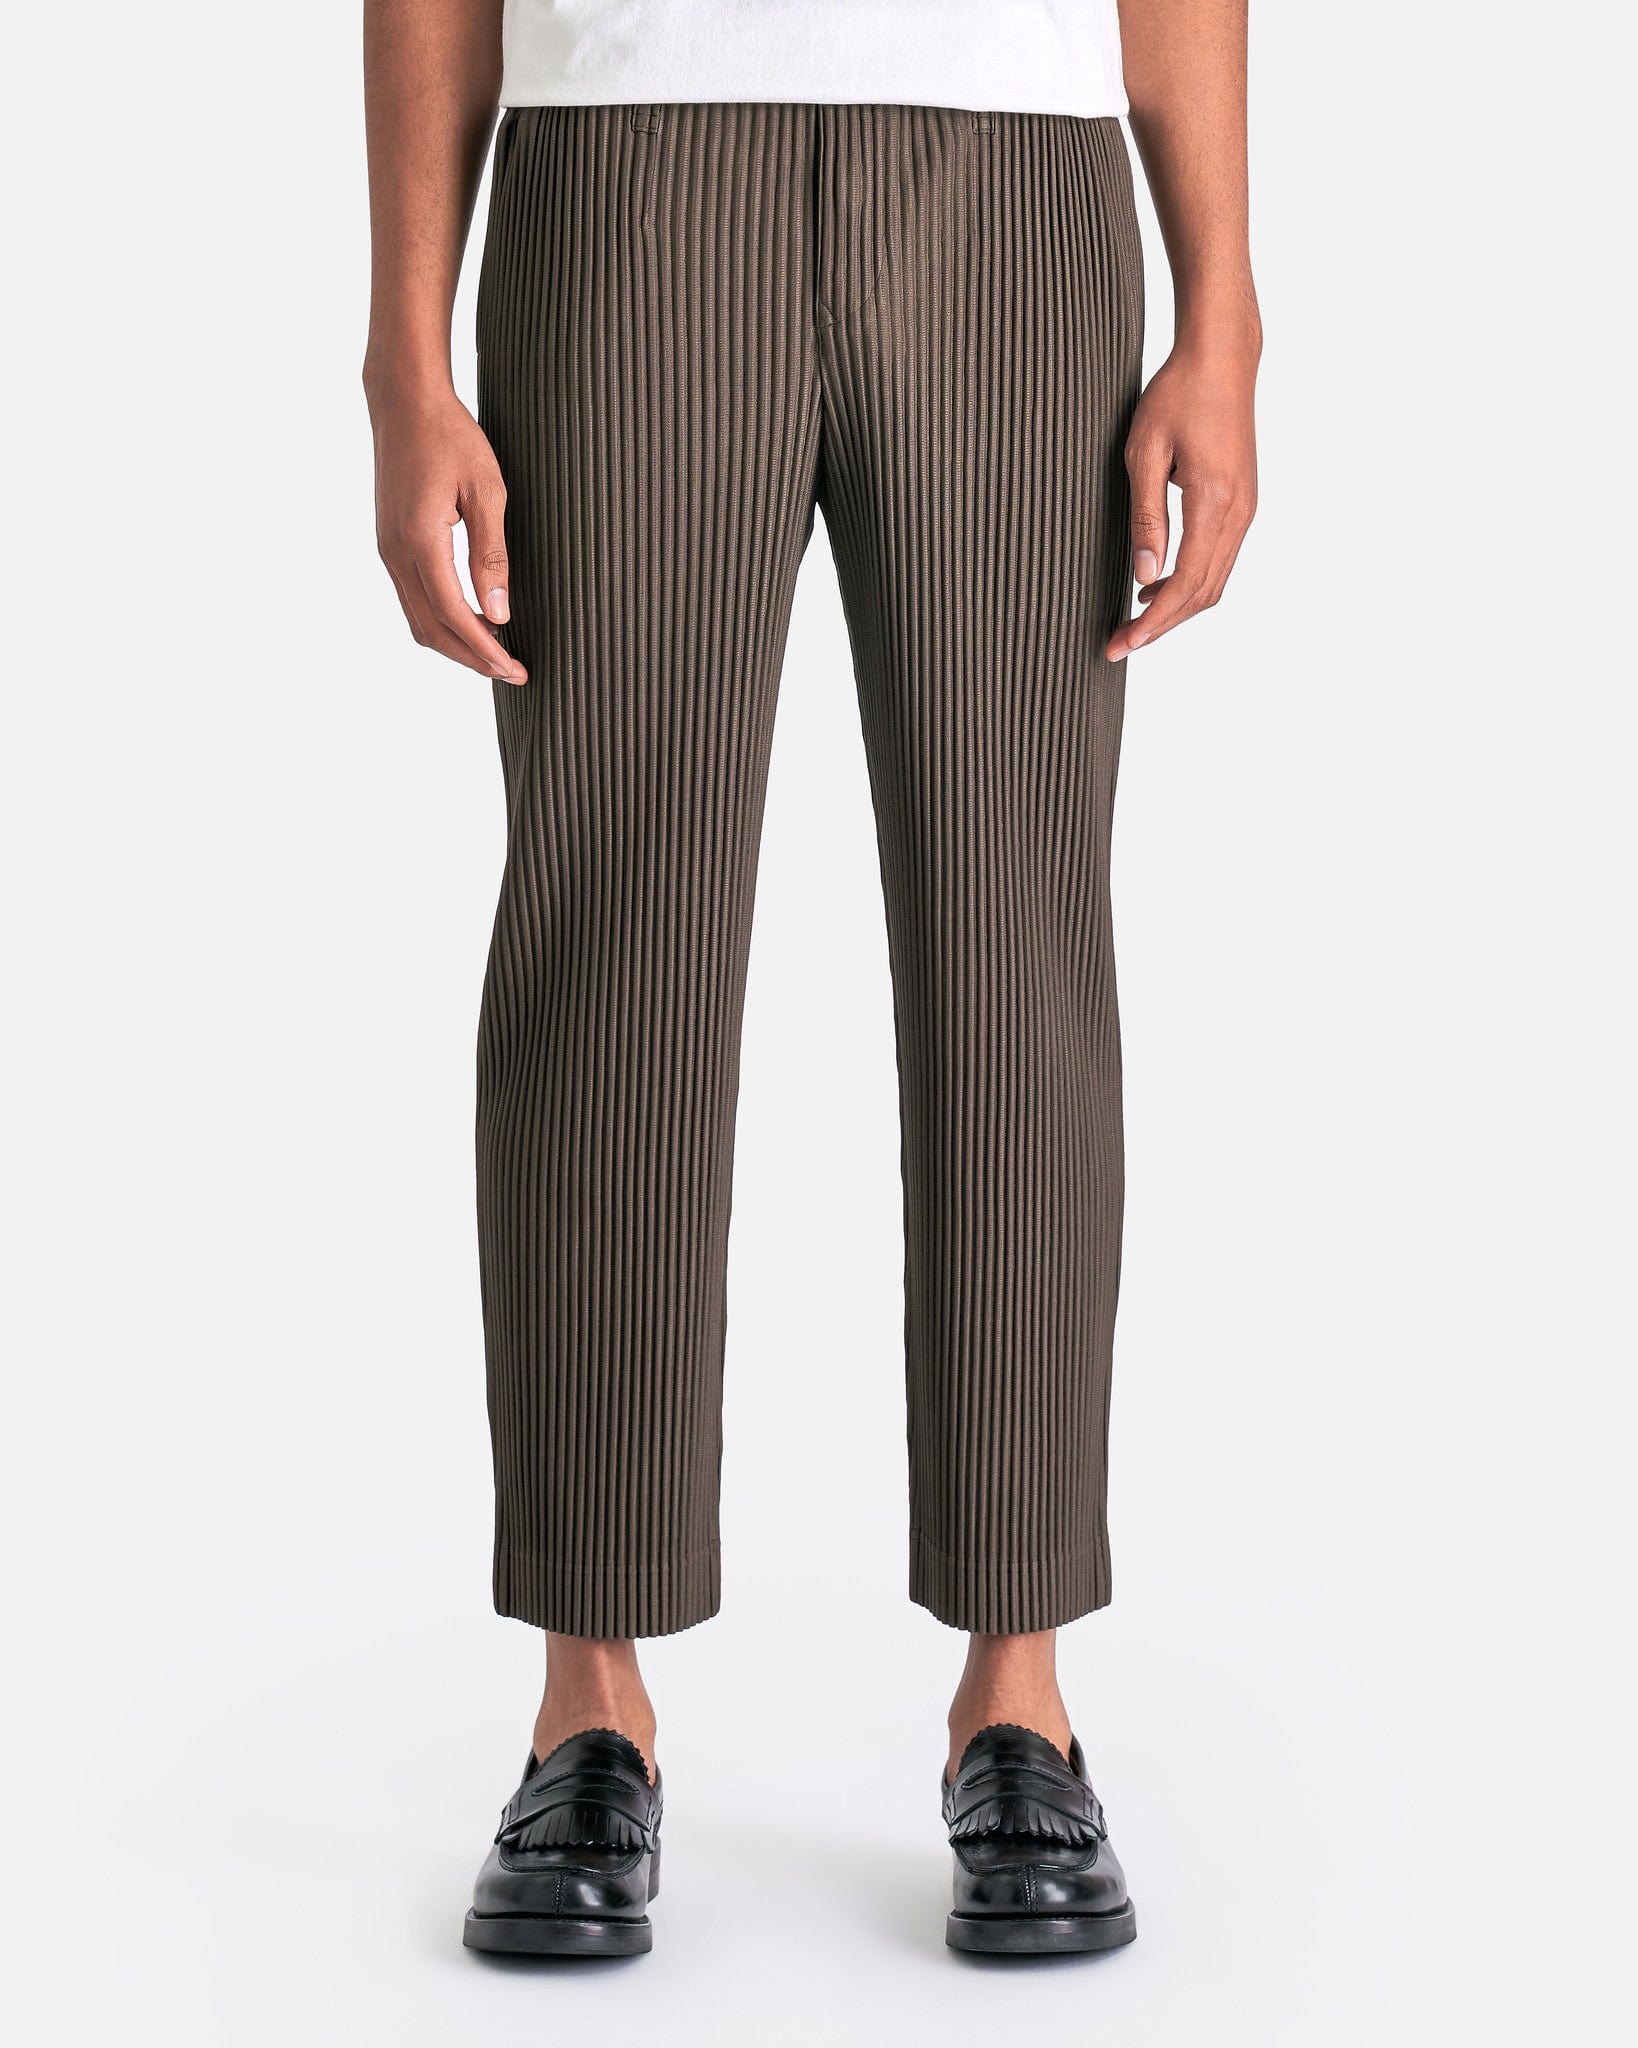 Setting Things Straight: Slim Pants, Wide Pants, and You